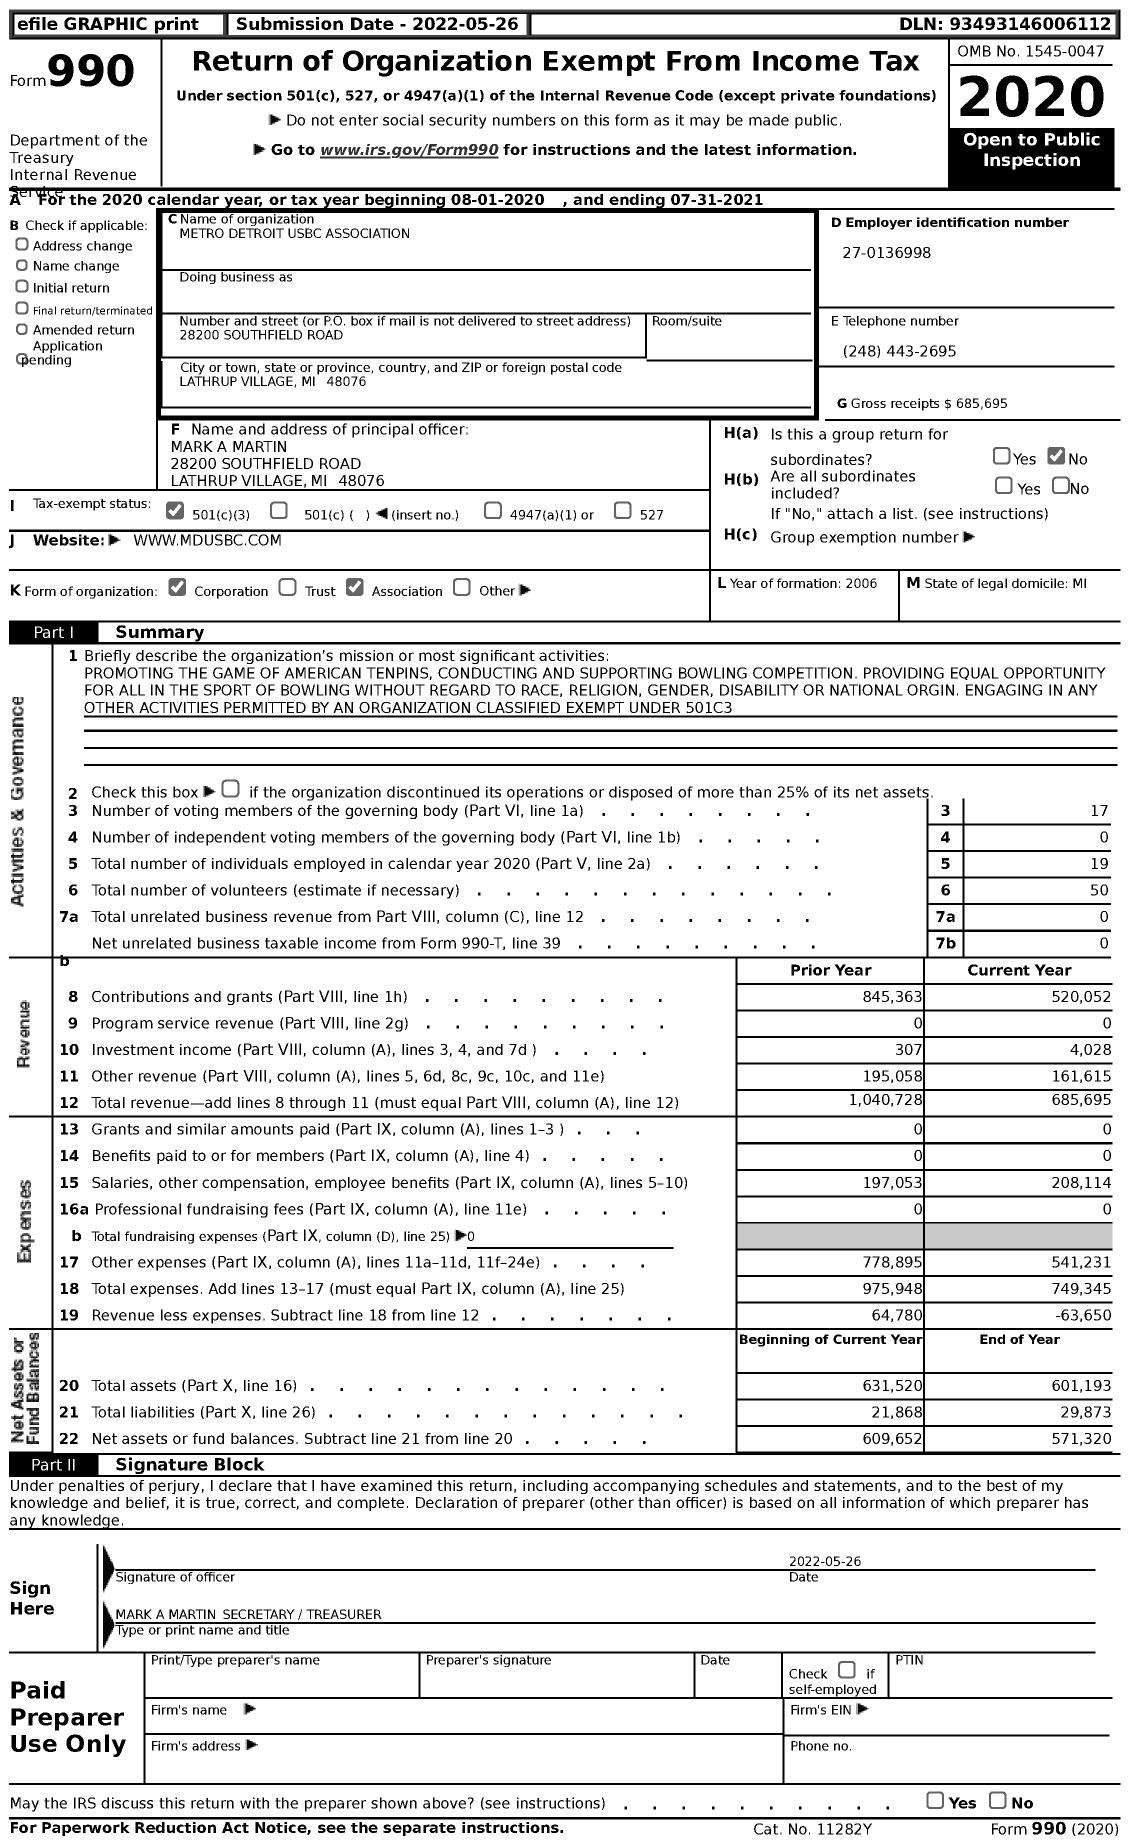 Image of first page of 2020 Form 990 for United States Bowling Congress - 81508 Metro Detroit USBC